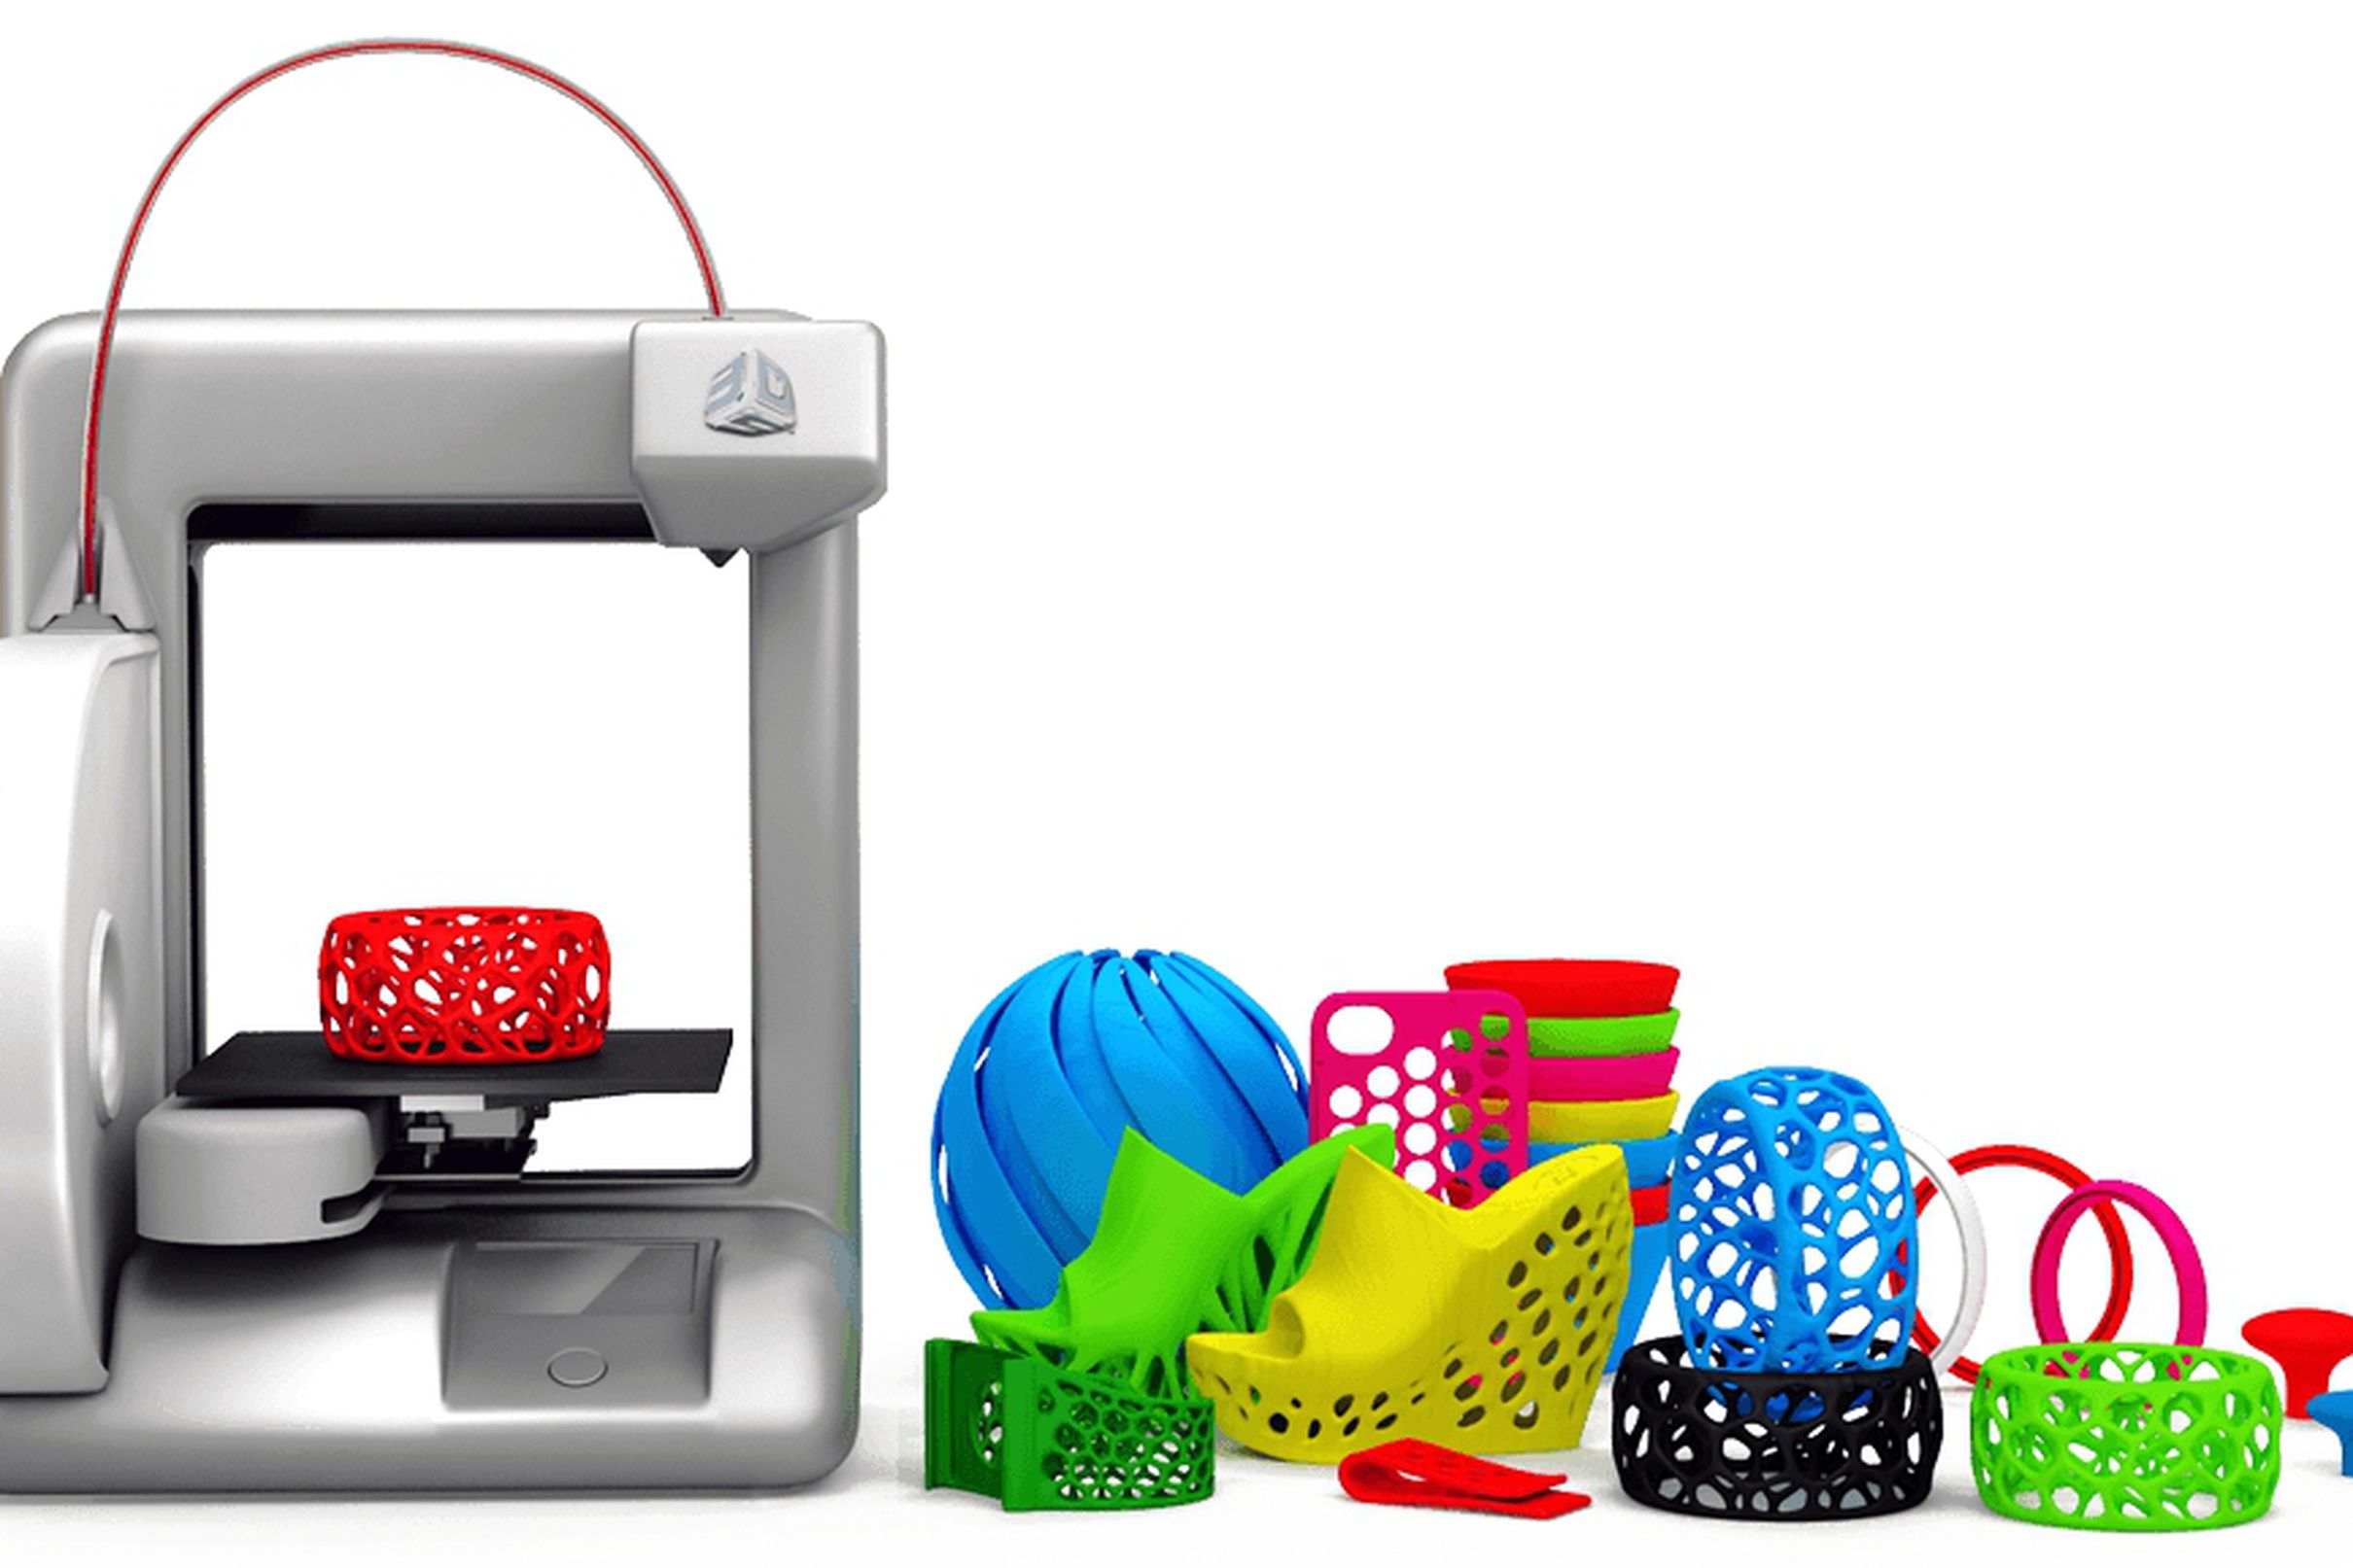 Cubify 3D printer now on preorder, will ship May 25th for